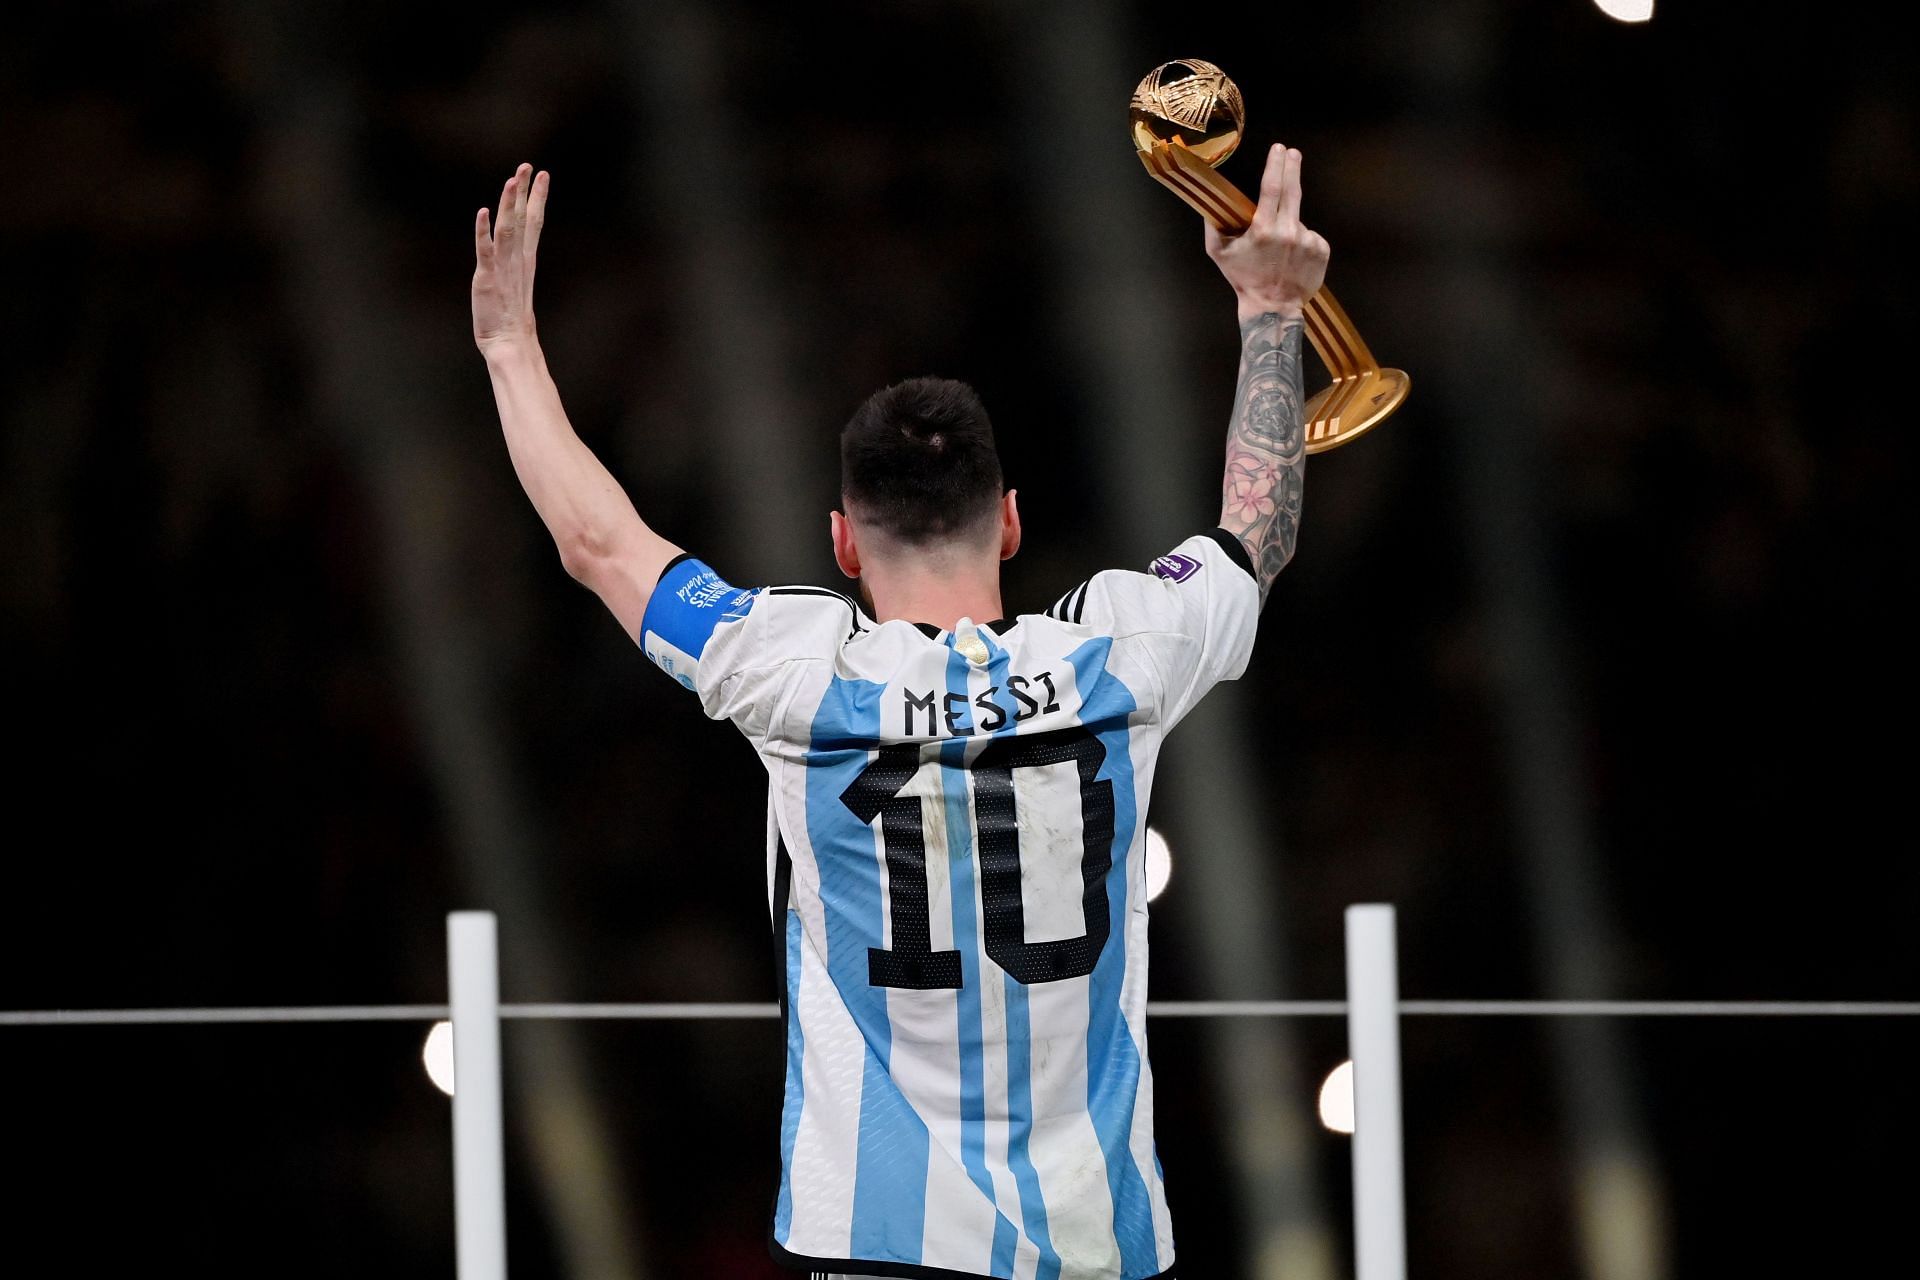 The Argentine great wants to continue representing La Albiceleste.